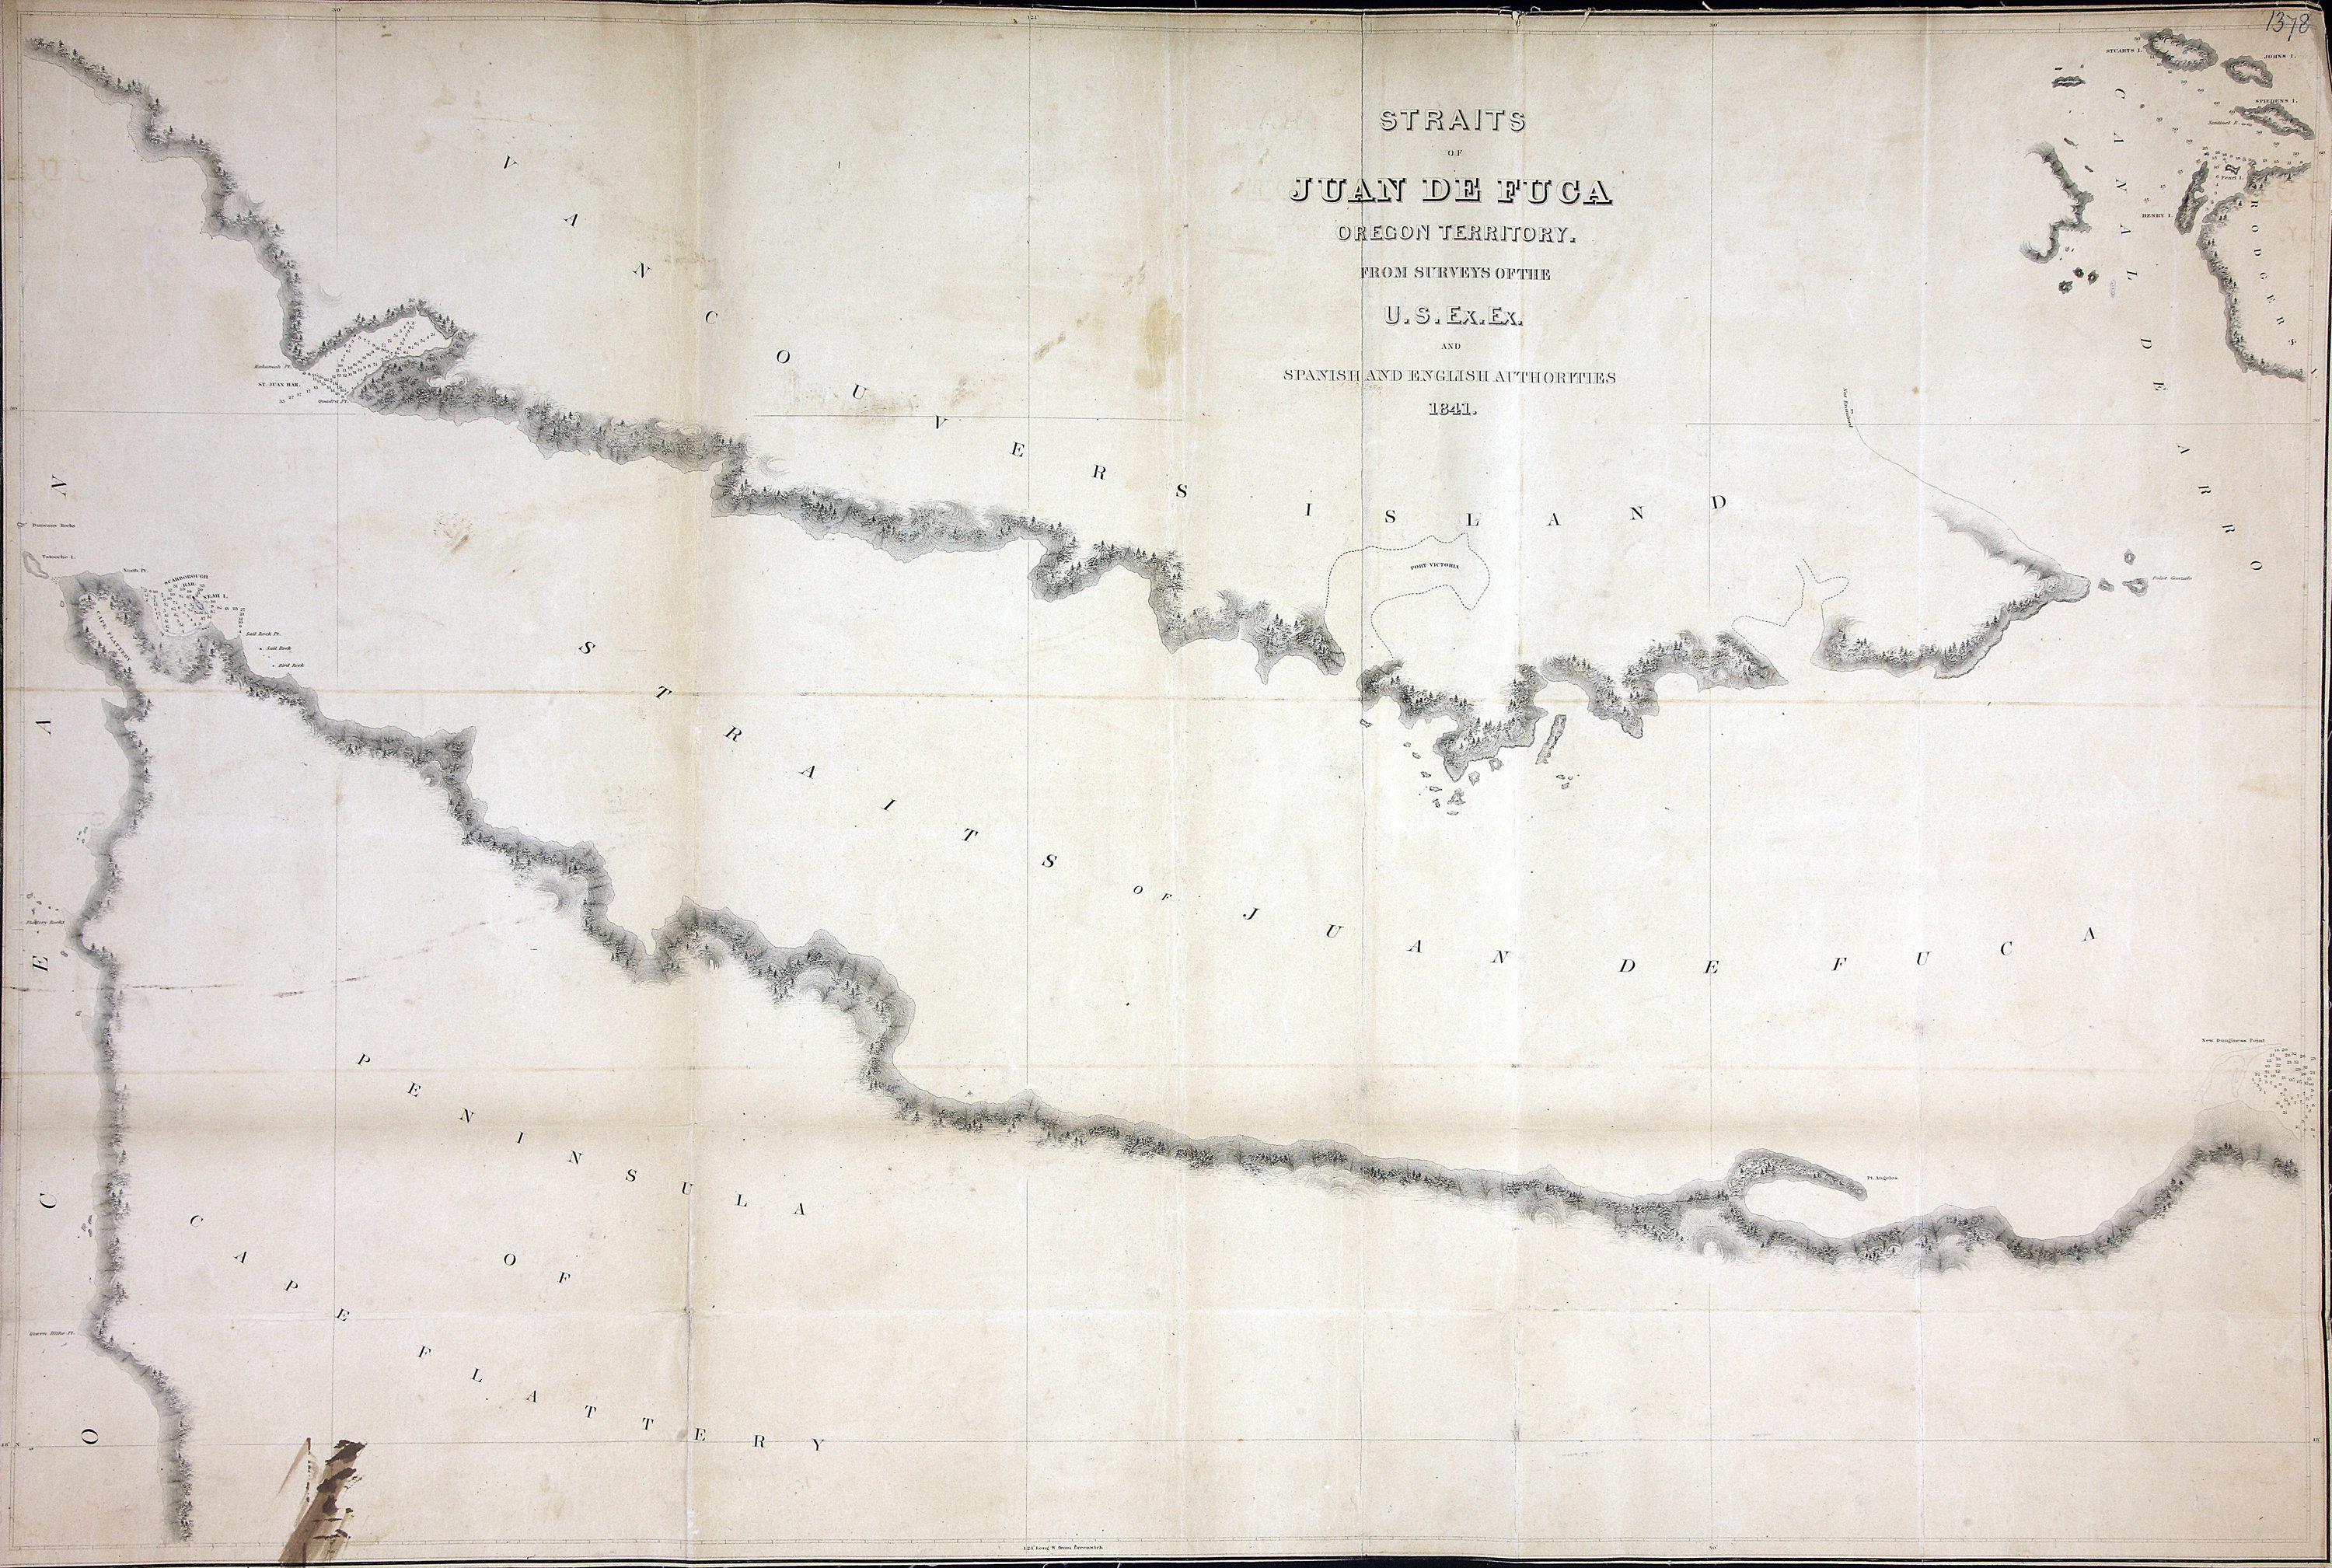 Straits of Juan de Fuca, Oregon Territory, from surveys of the U.S. Ex. Ex. and Spanish and English authorities